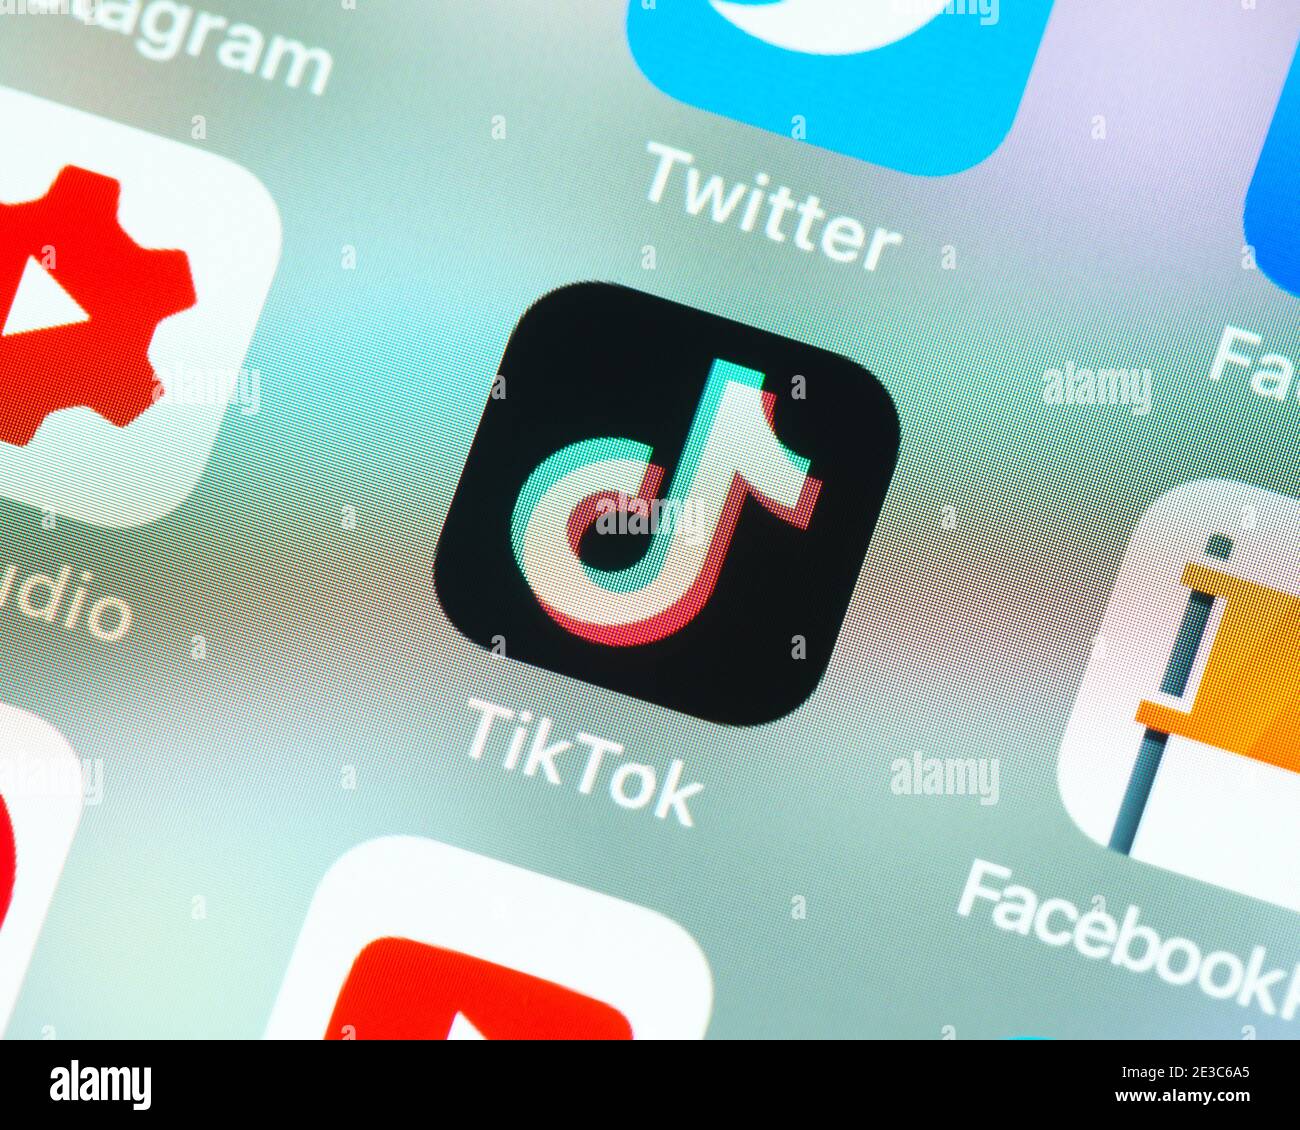 TikTok app icon on Apple iPhone screen. TikTok is a video sharing social networking service owned by Chinese company ByteDance. Stock Photo